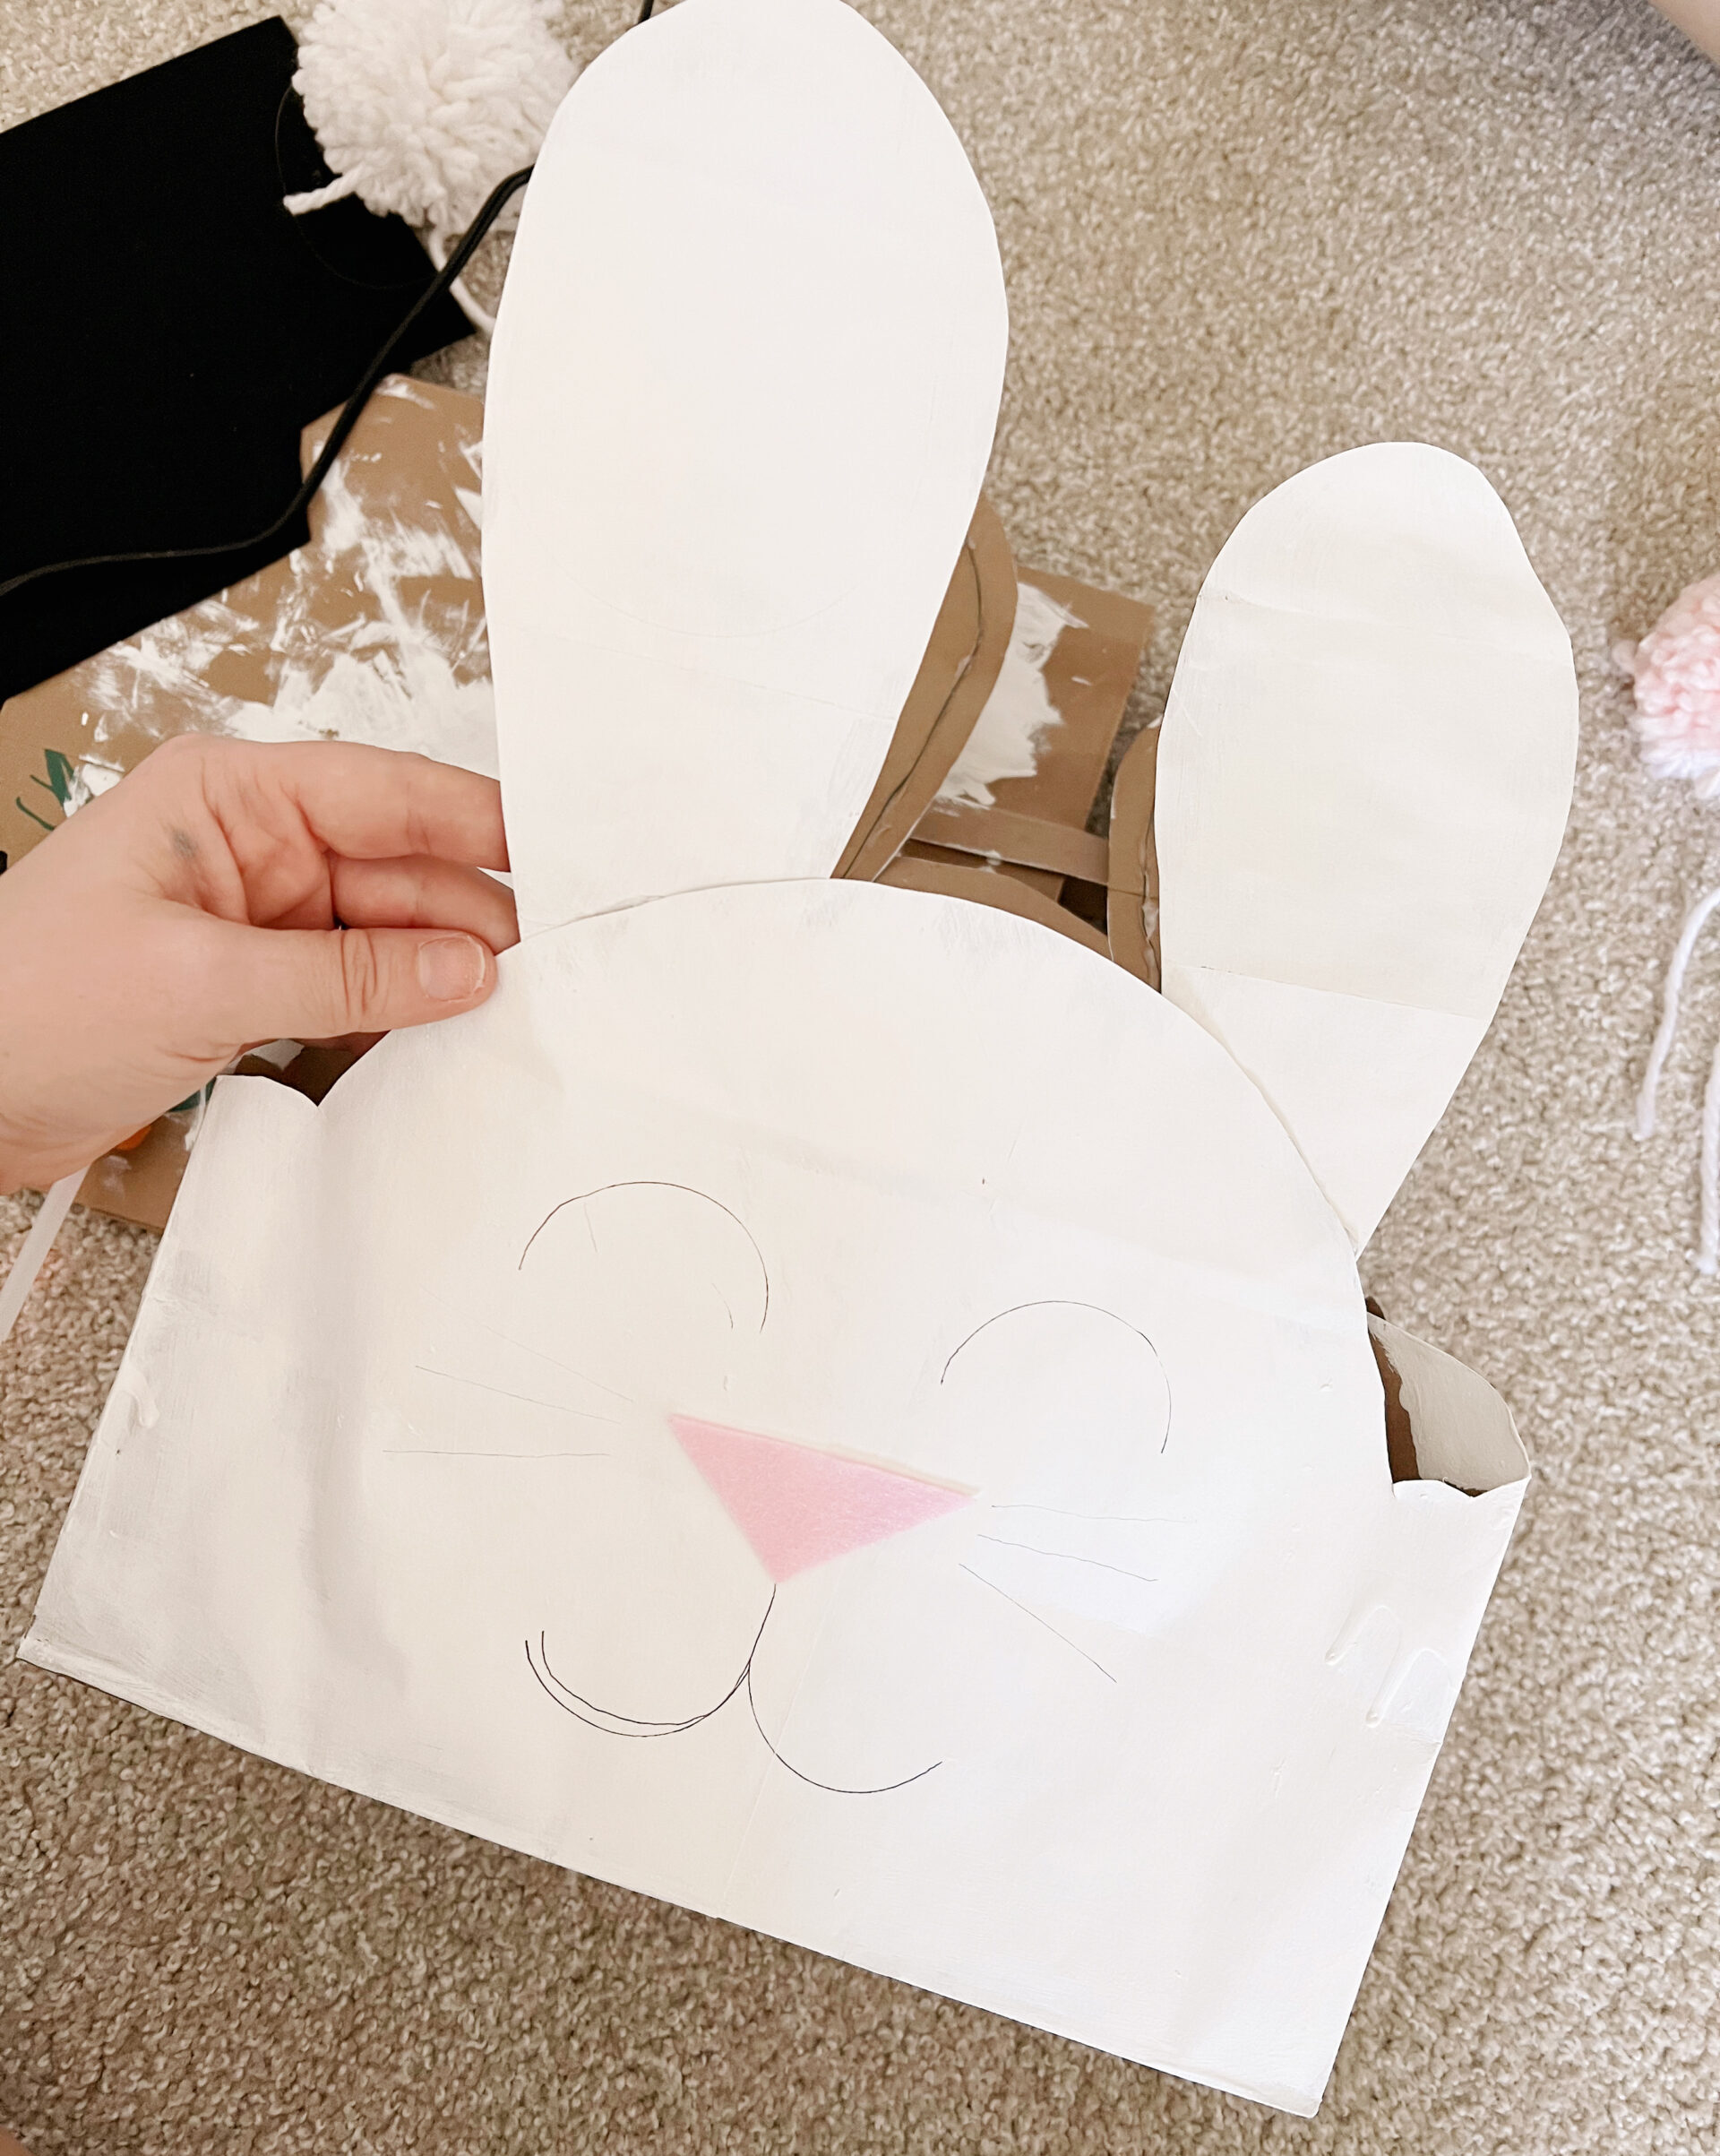 paper bag shaped into bunny face.